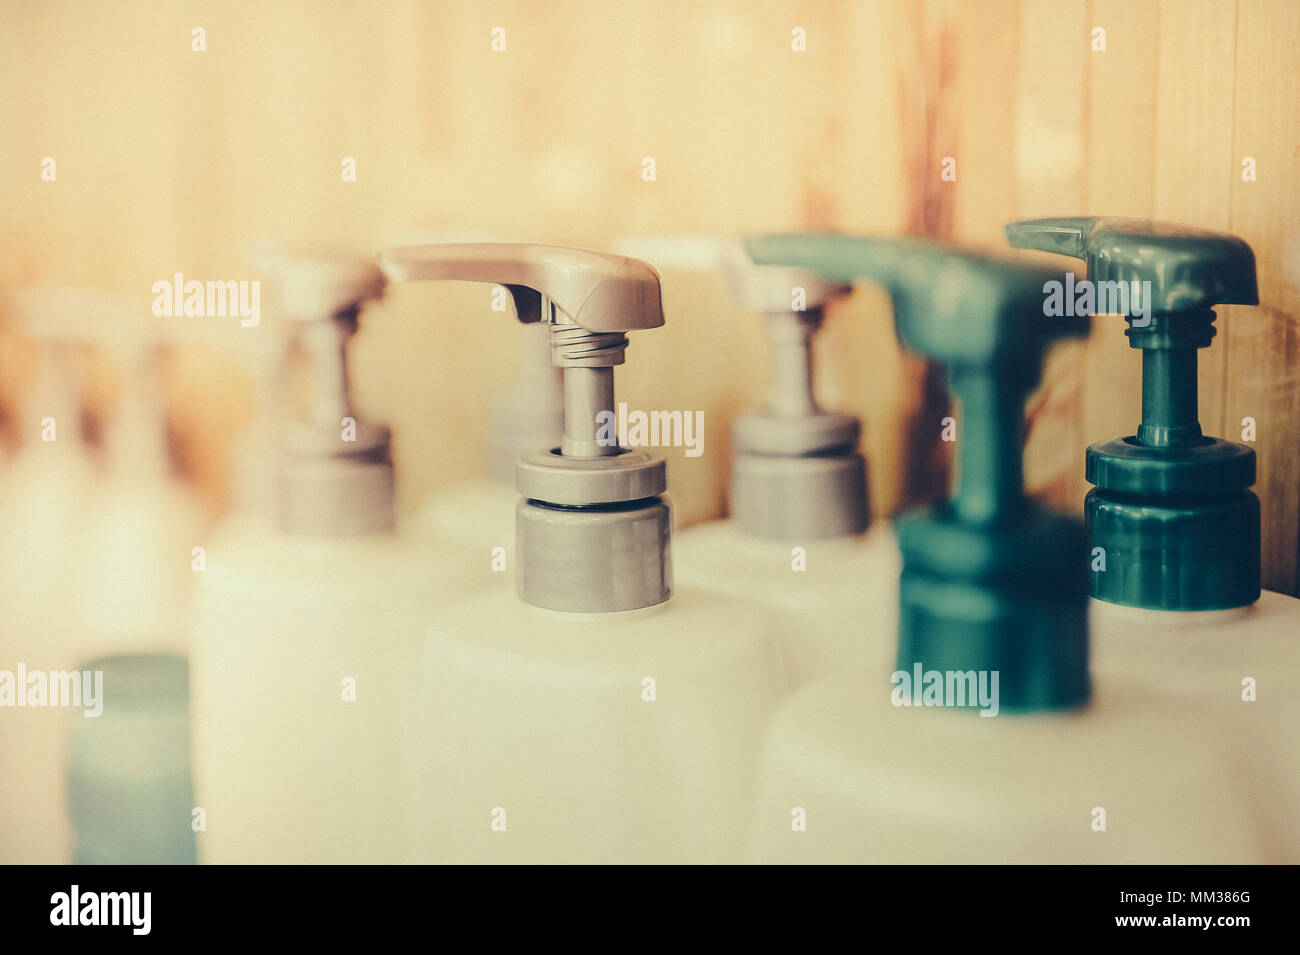 Bottle of liquid soap, shower gel or shampoo. Toned image. Shampoo bottle with dispenser. close up view Stock Photo